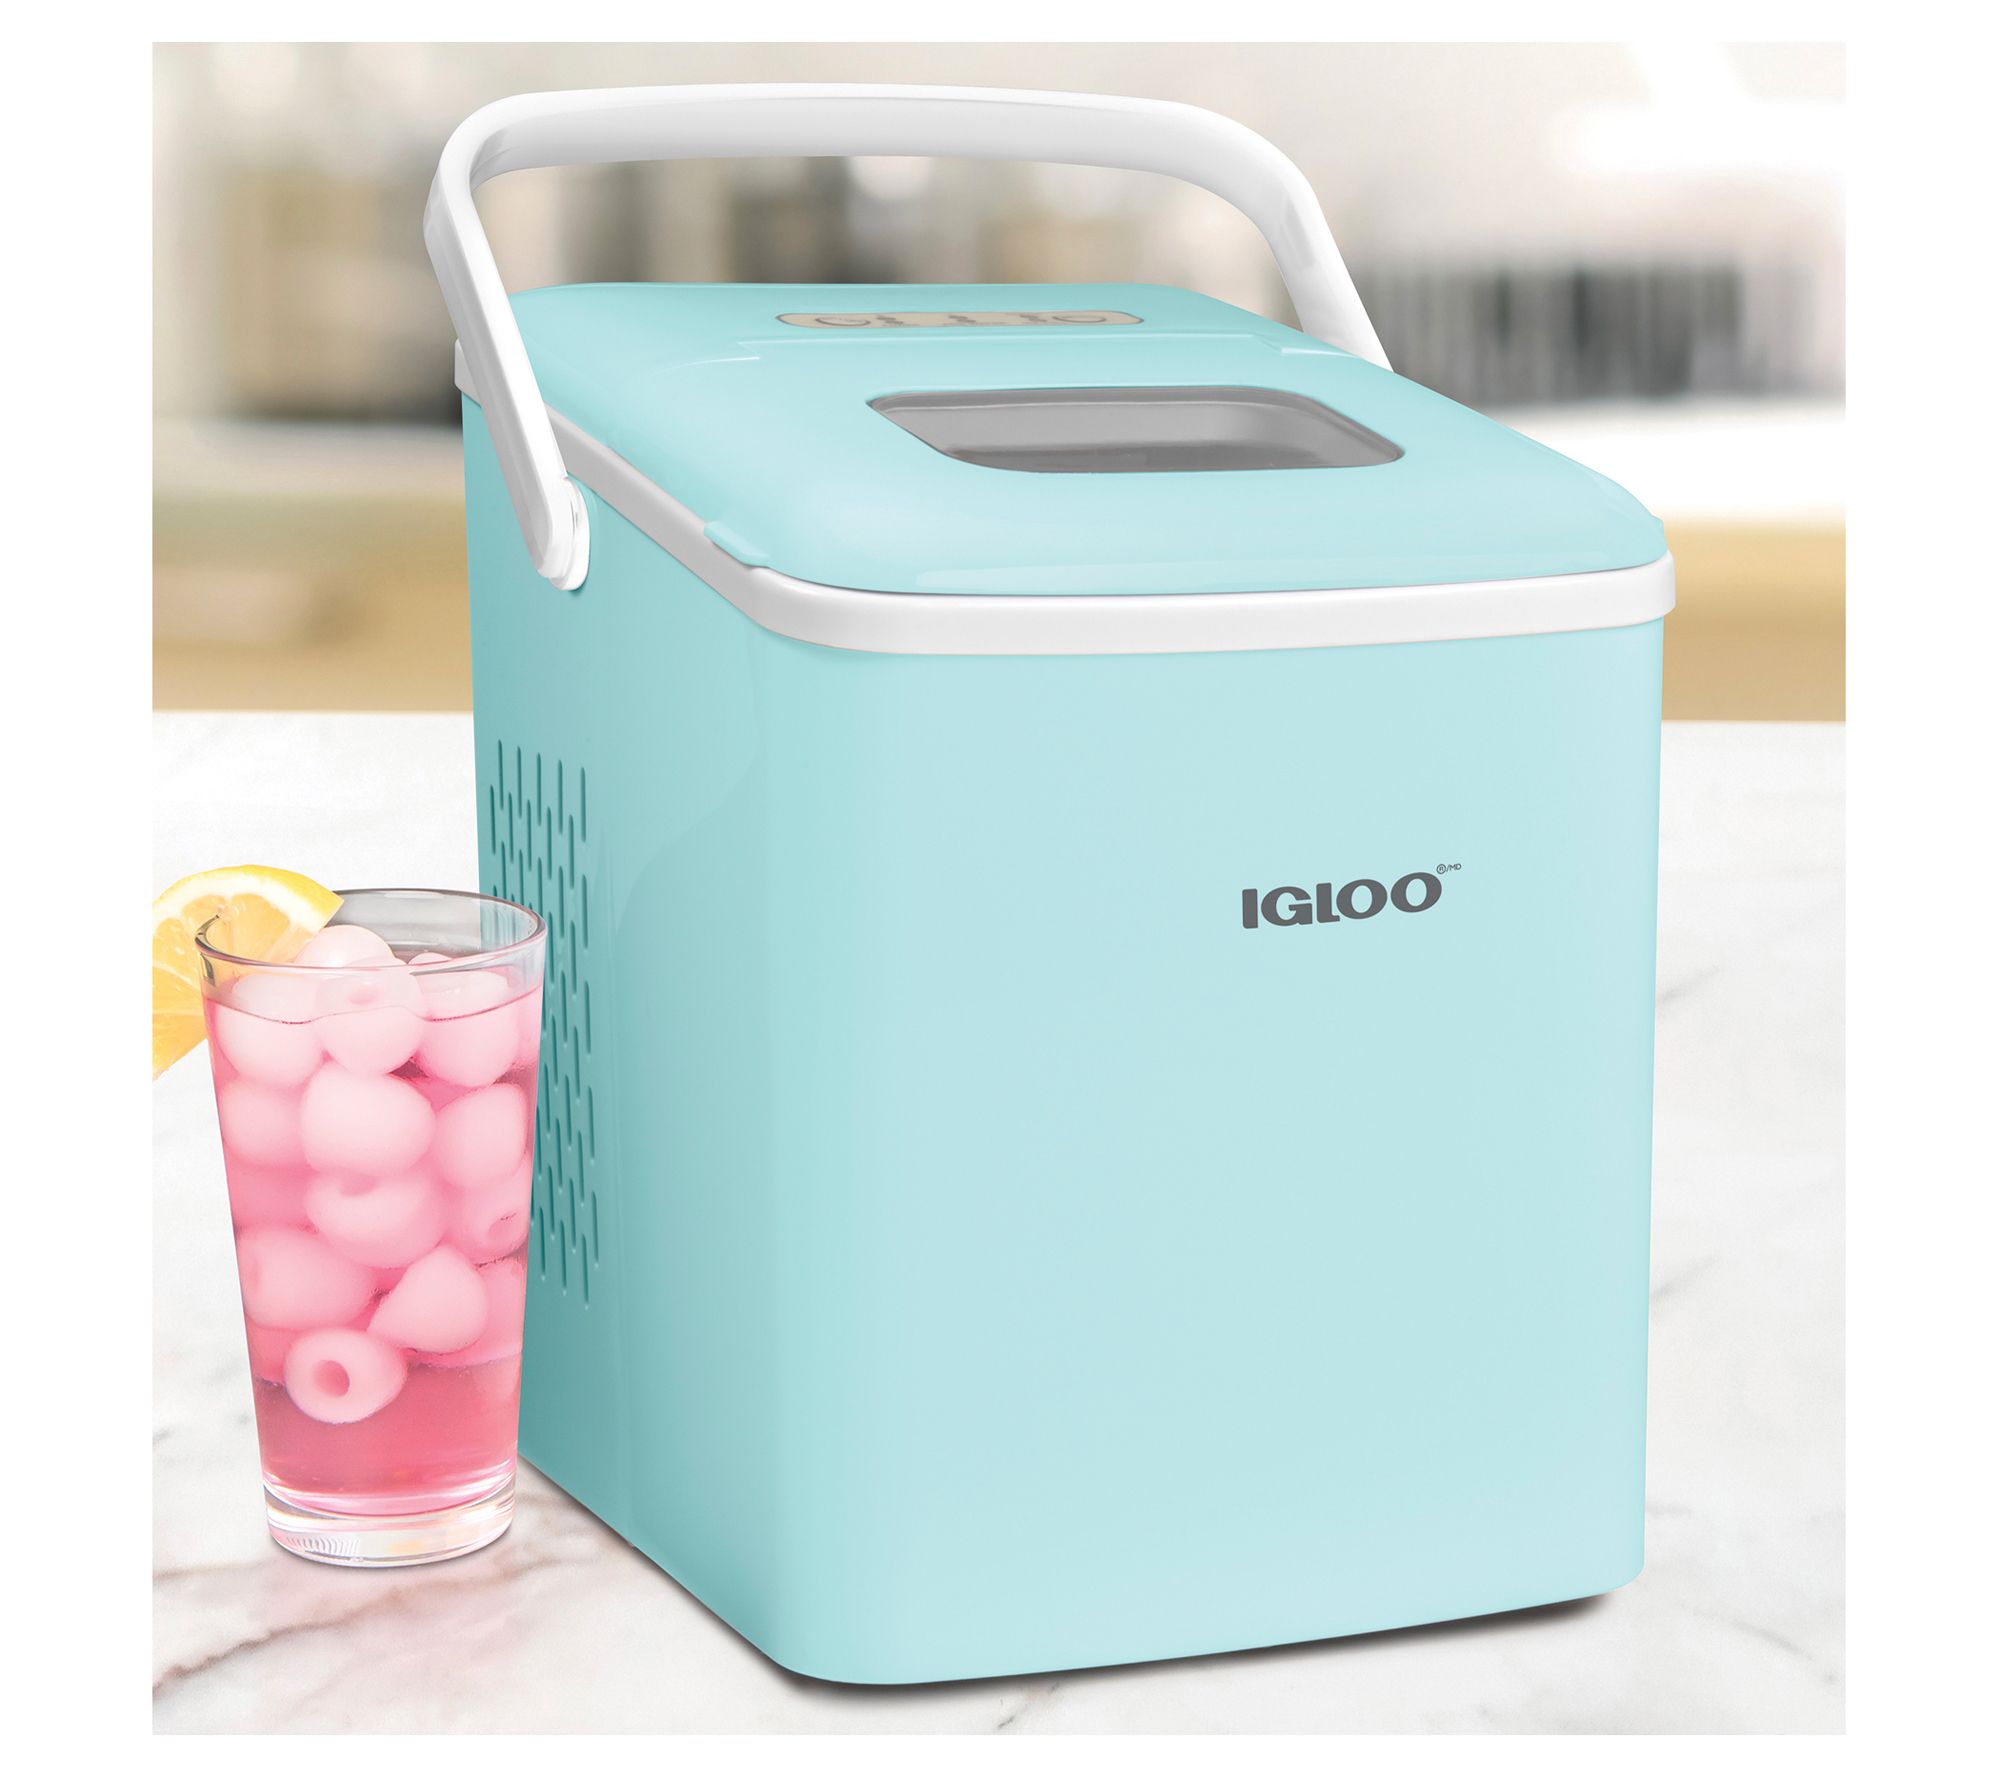 QVC  26 Pound Igloo Ice Maker For $59.98 :: Southern Savers